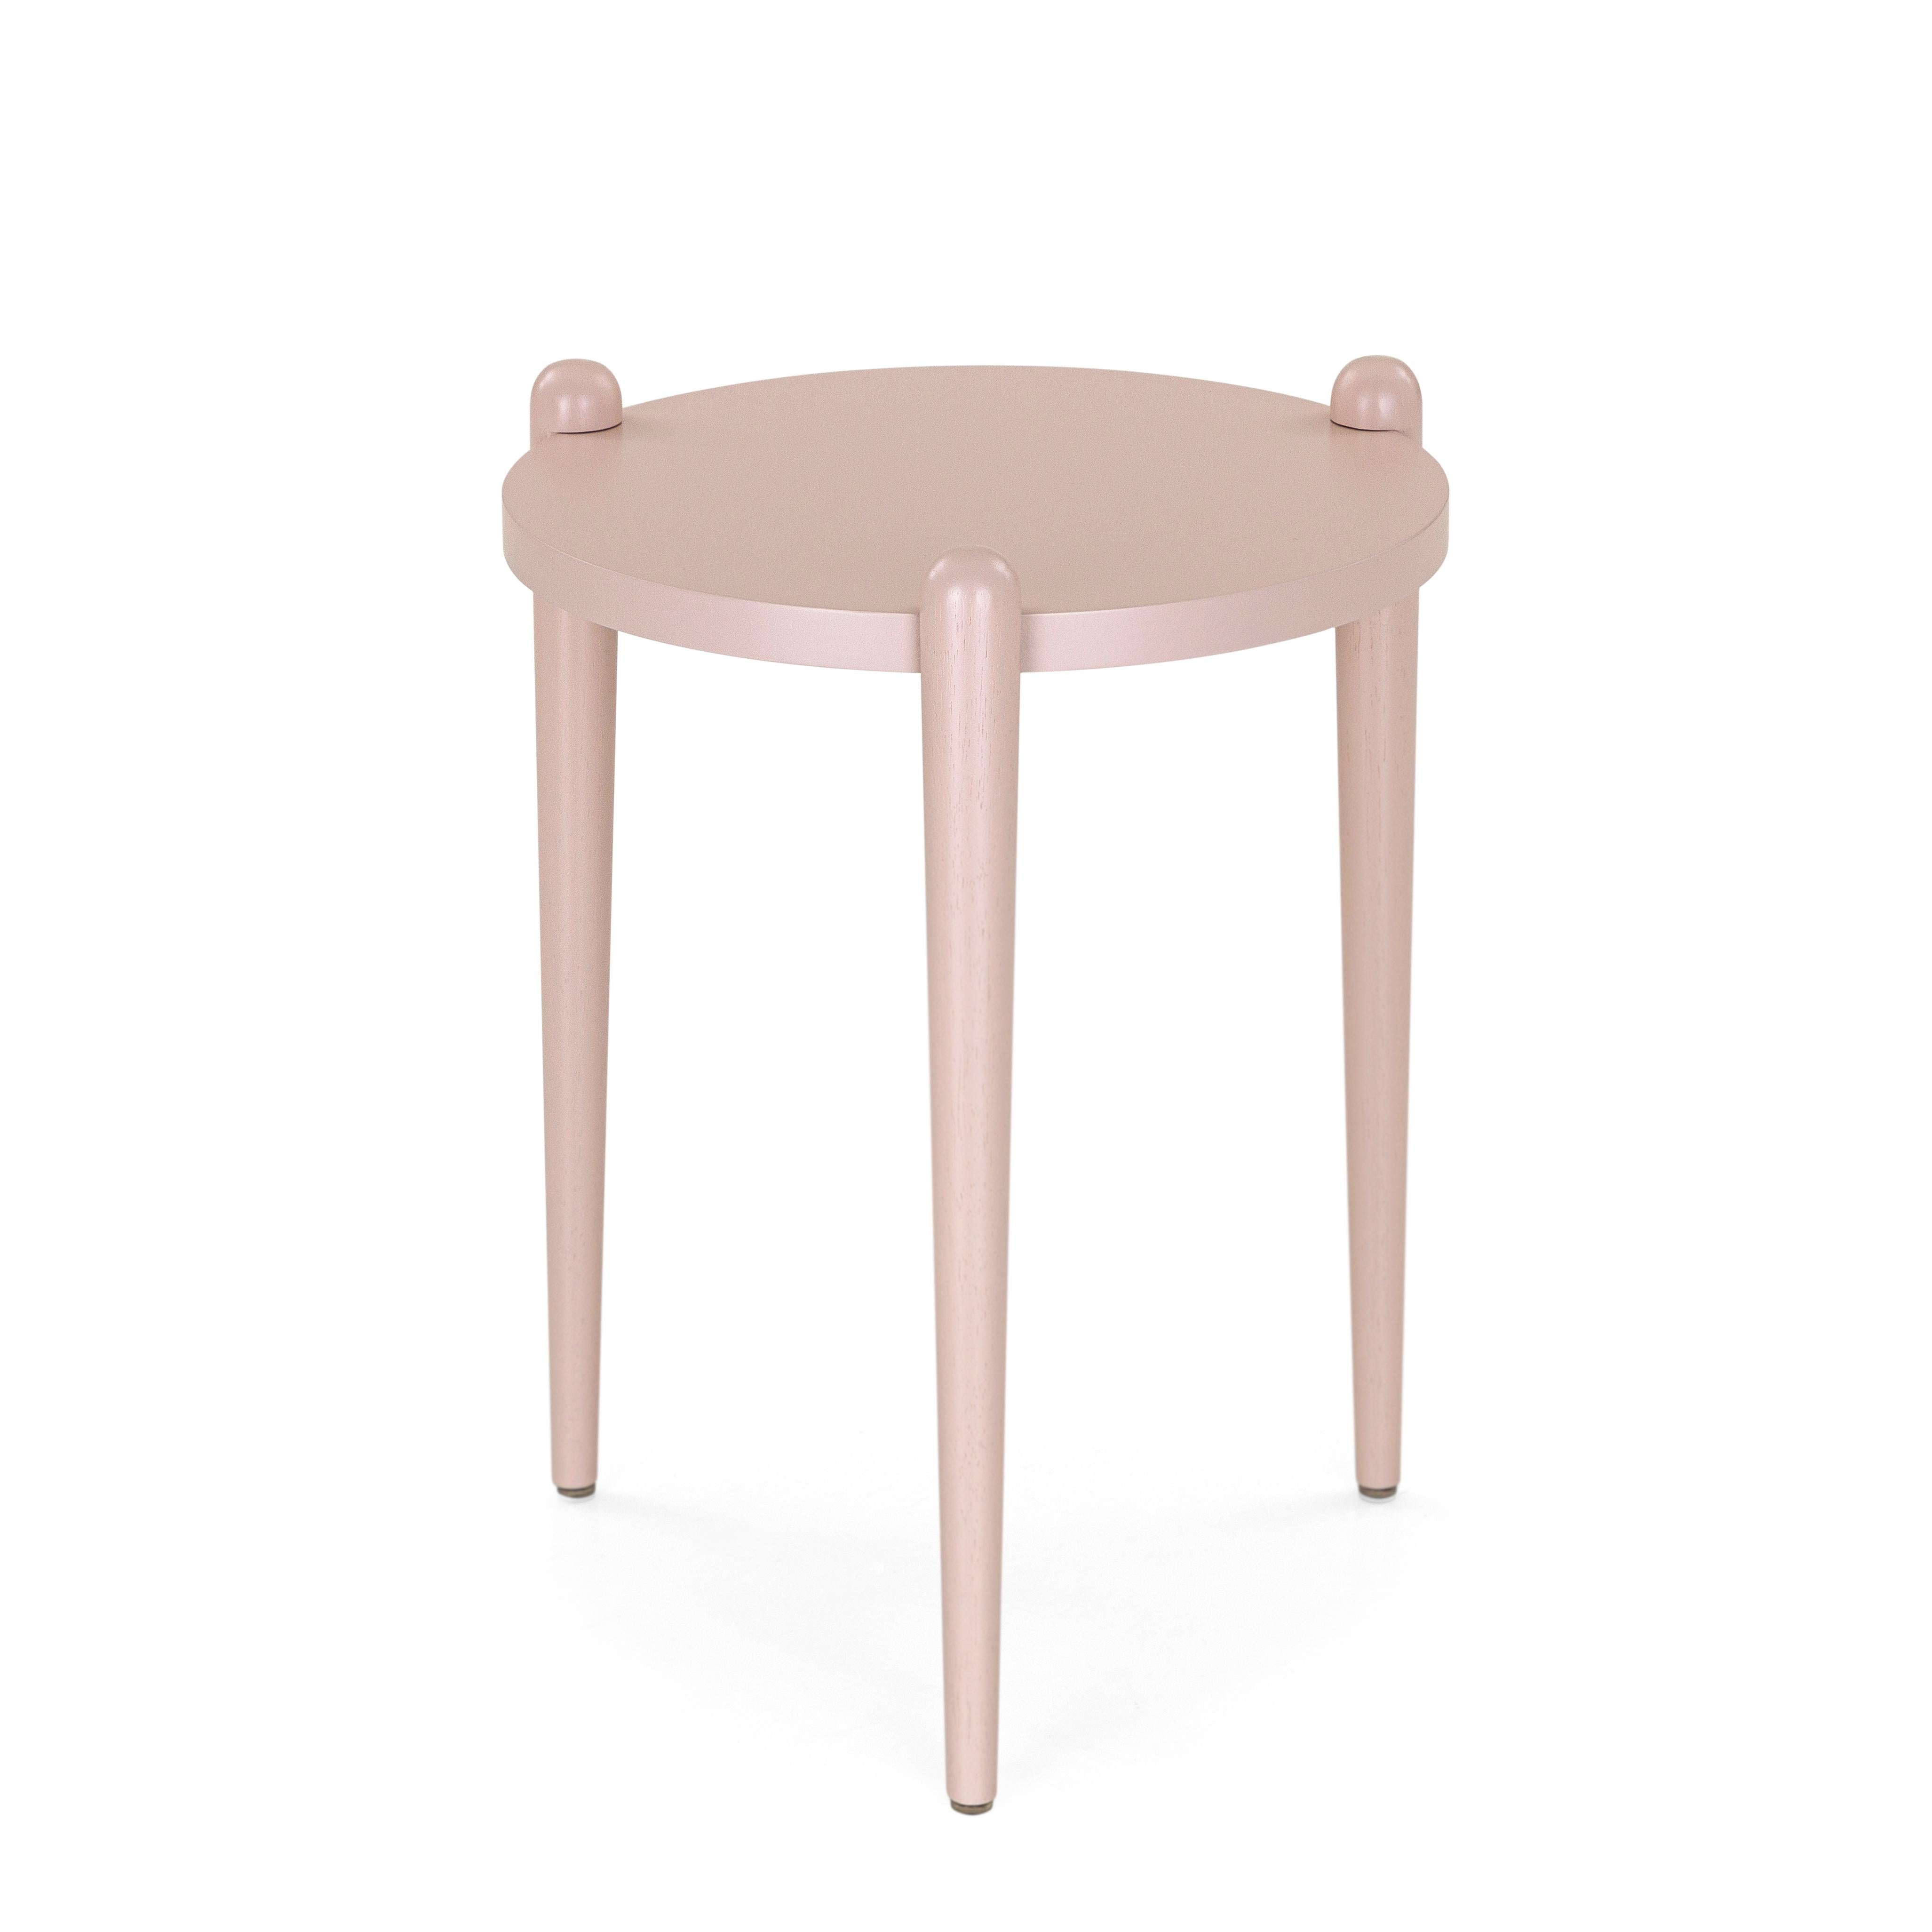 Modern Pan Contemporary Side Tables in Light Pink Quartz Finish, Set of 3 For Sale